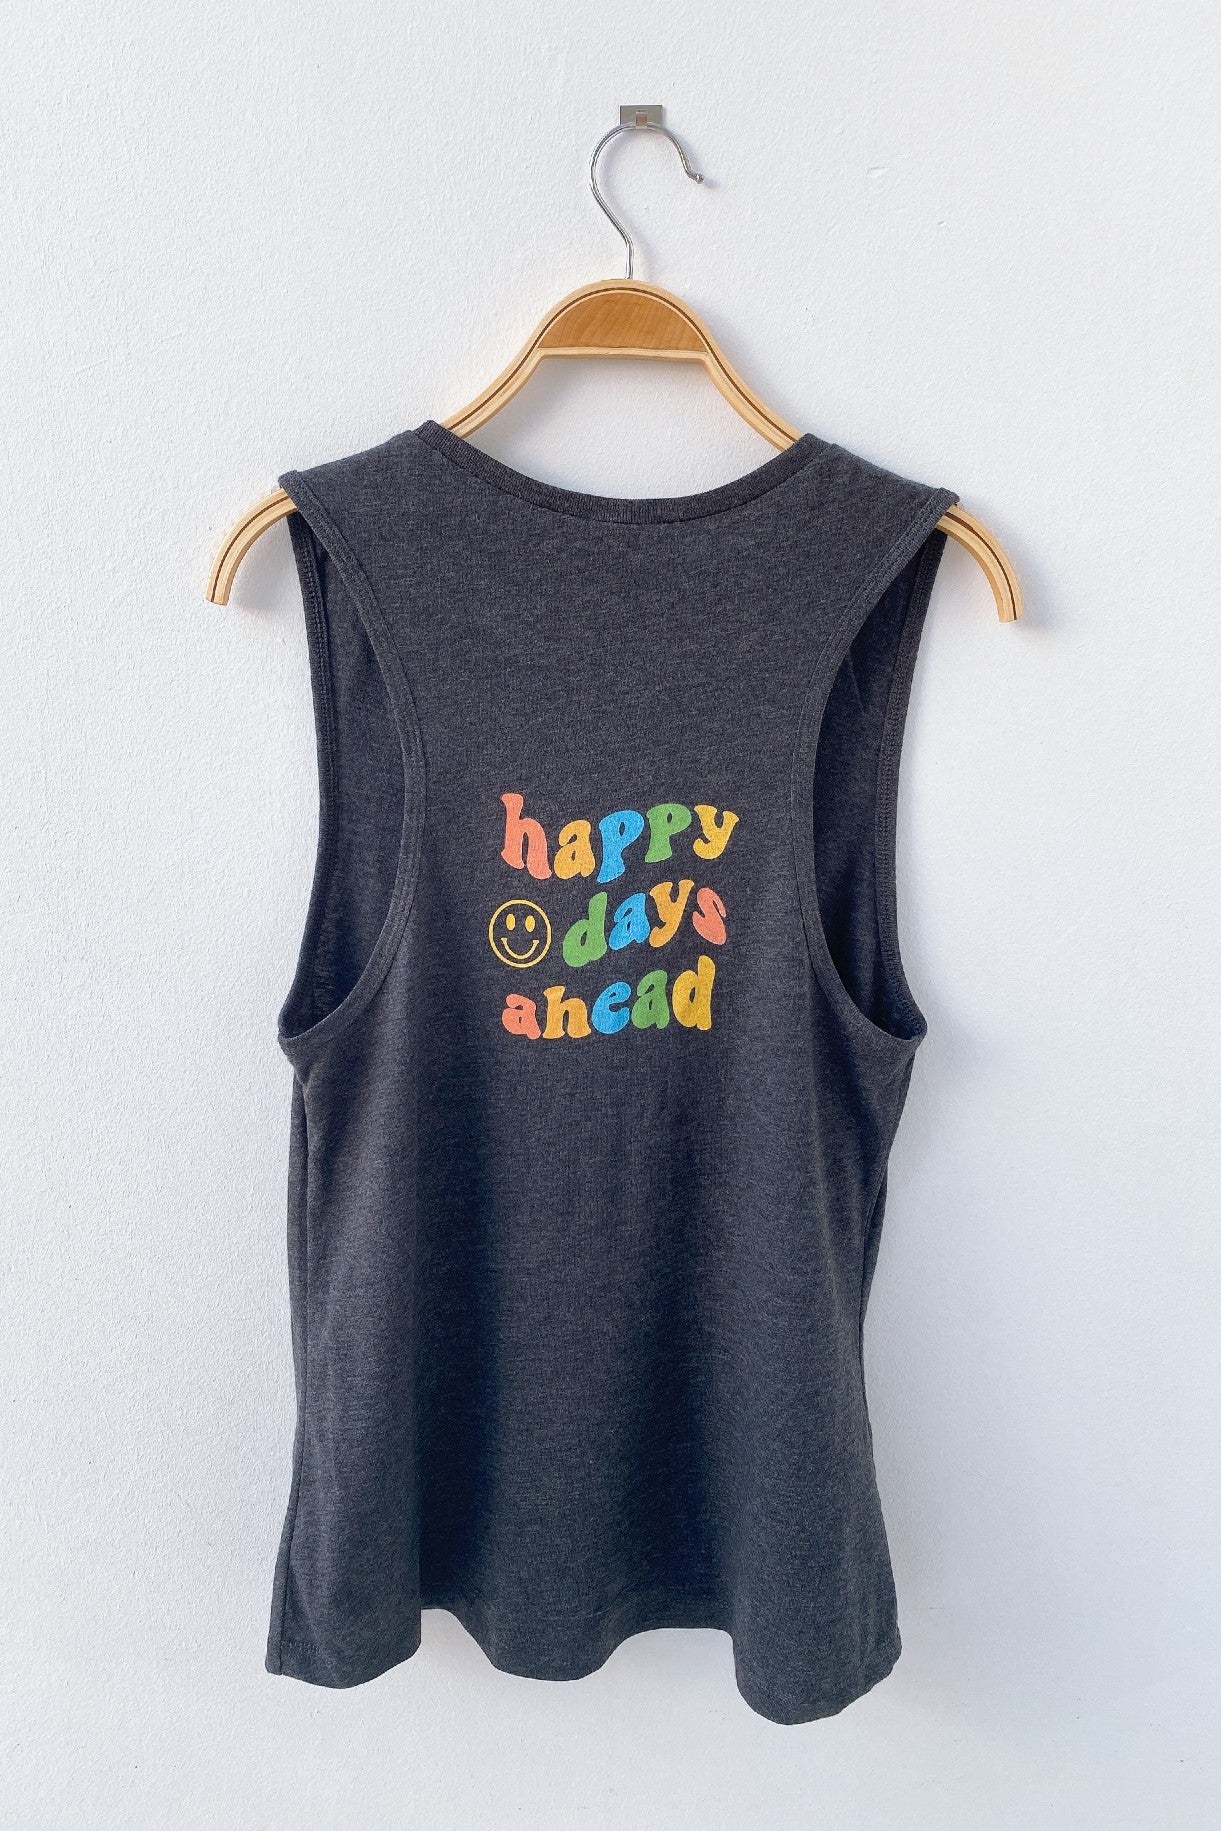 happy days ahead Muscle Tank (Quote at the back)